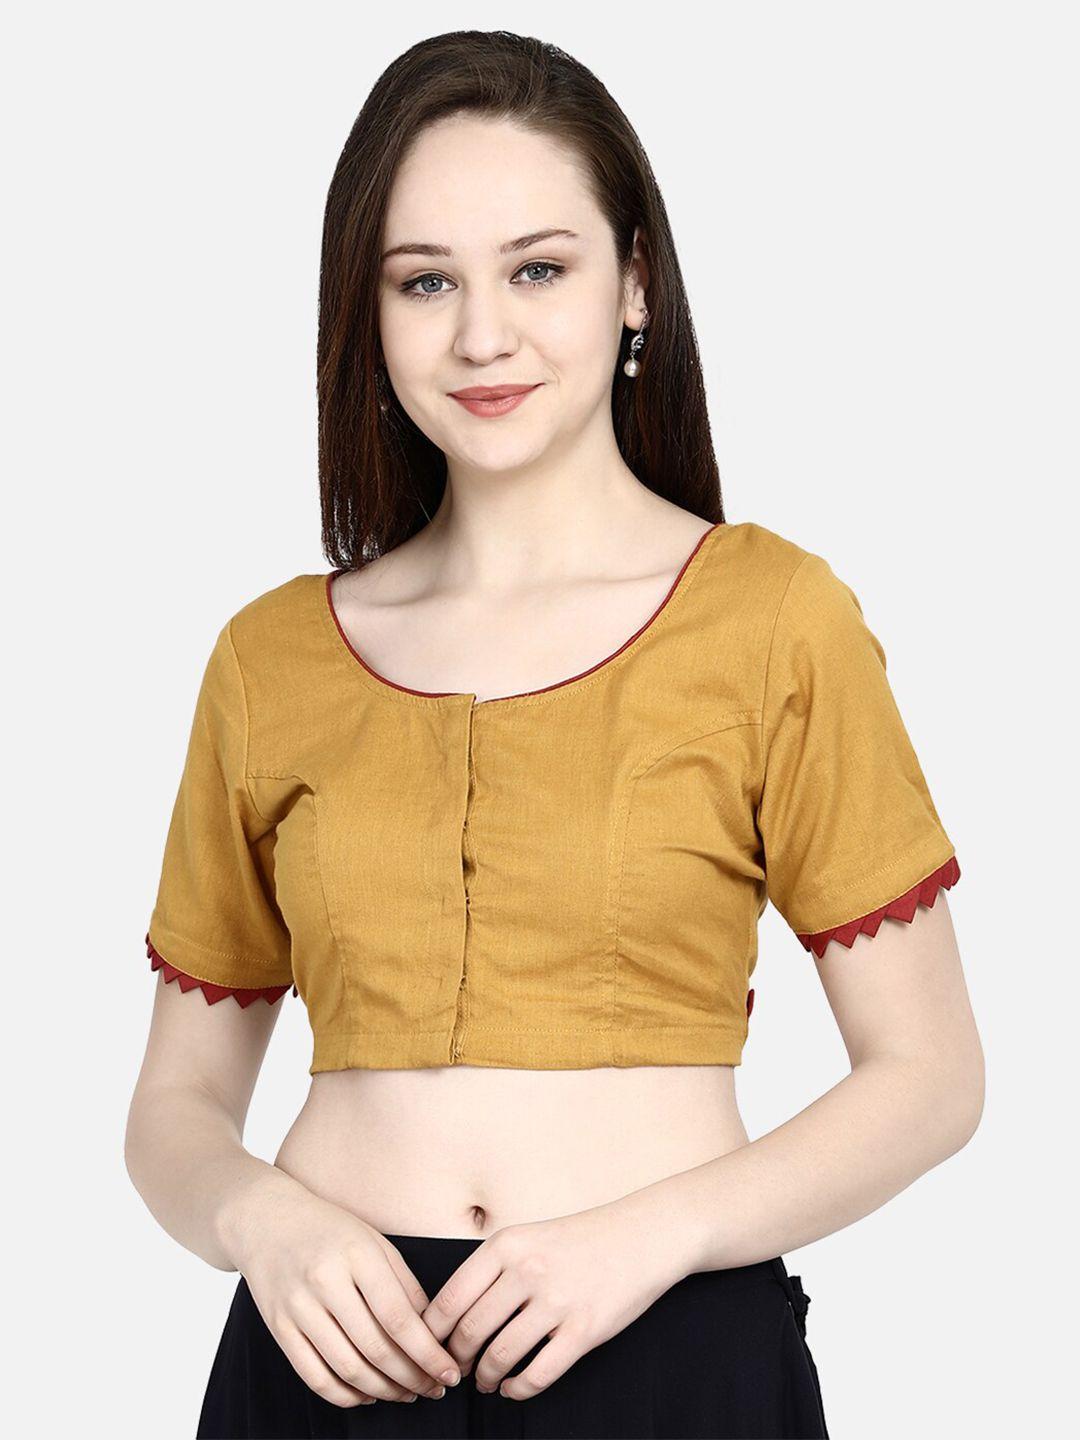 molcha-women-mustard-yellow-&-maroon-solid-handcrafted-ready-made-saree-blouse